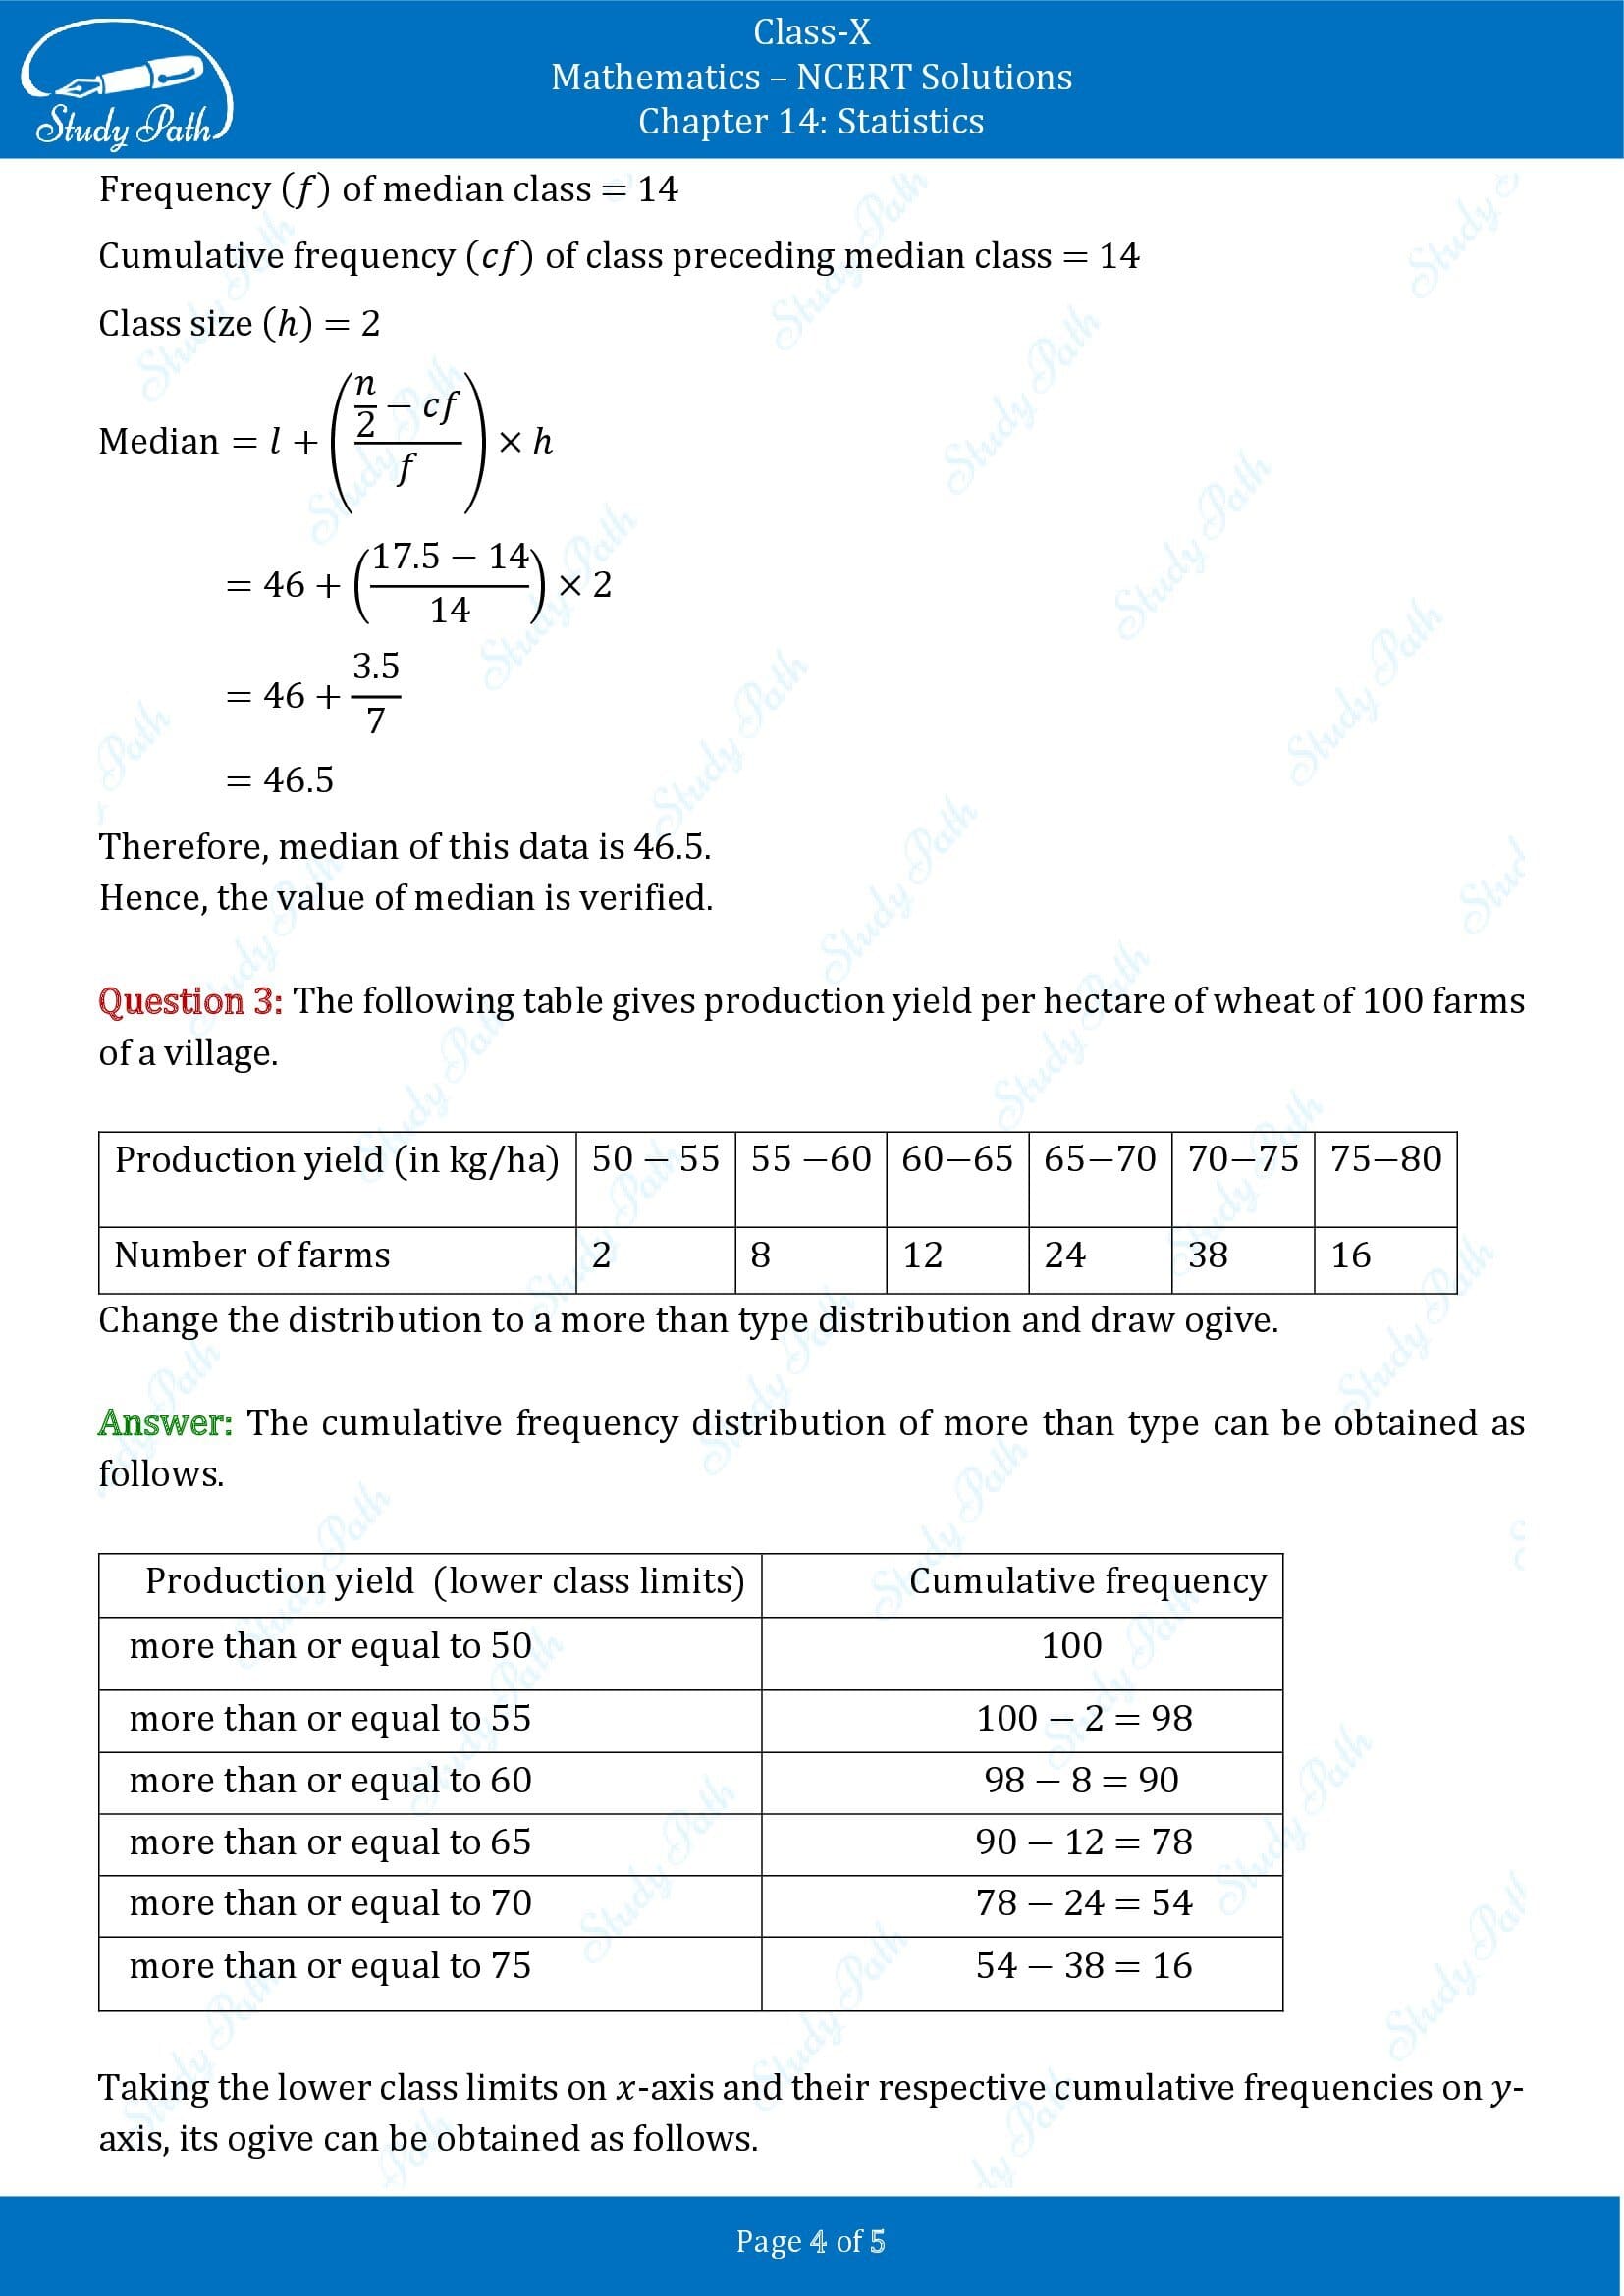 NCERT Solutions for Class 10 Maths Chapter 14 Statistics Exercise 14.4 00004